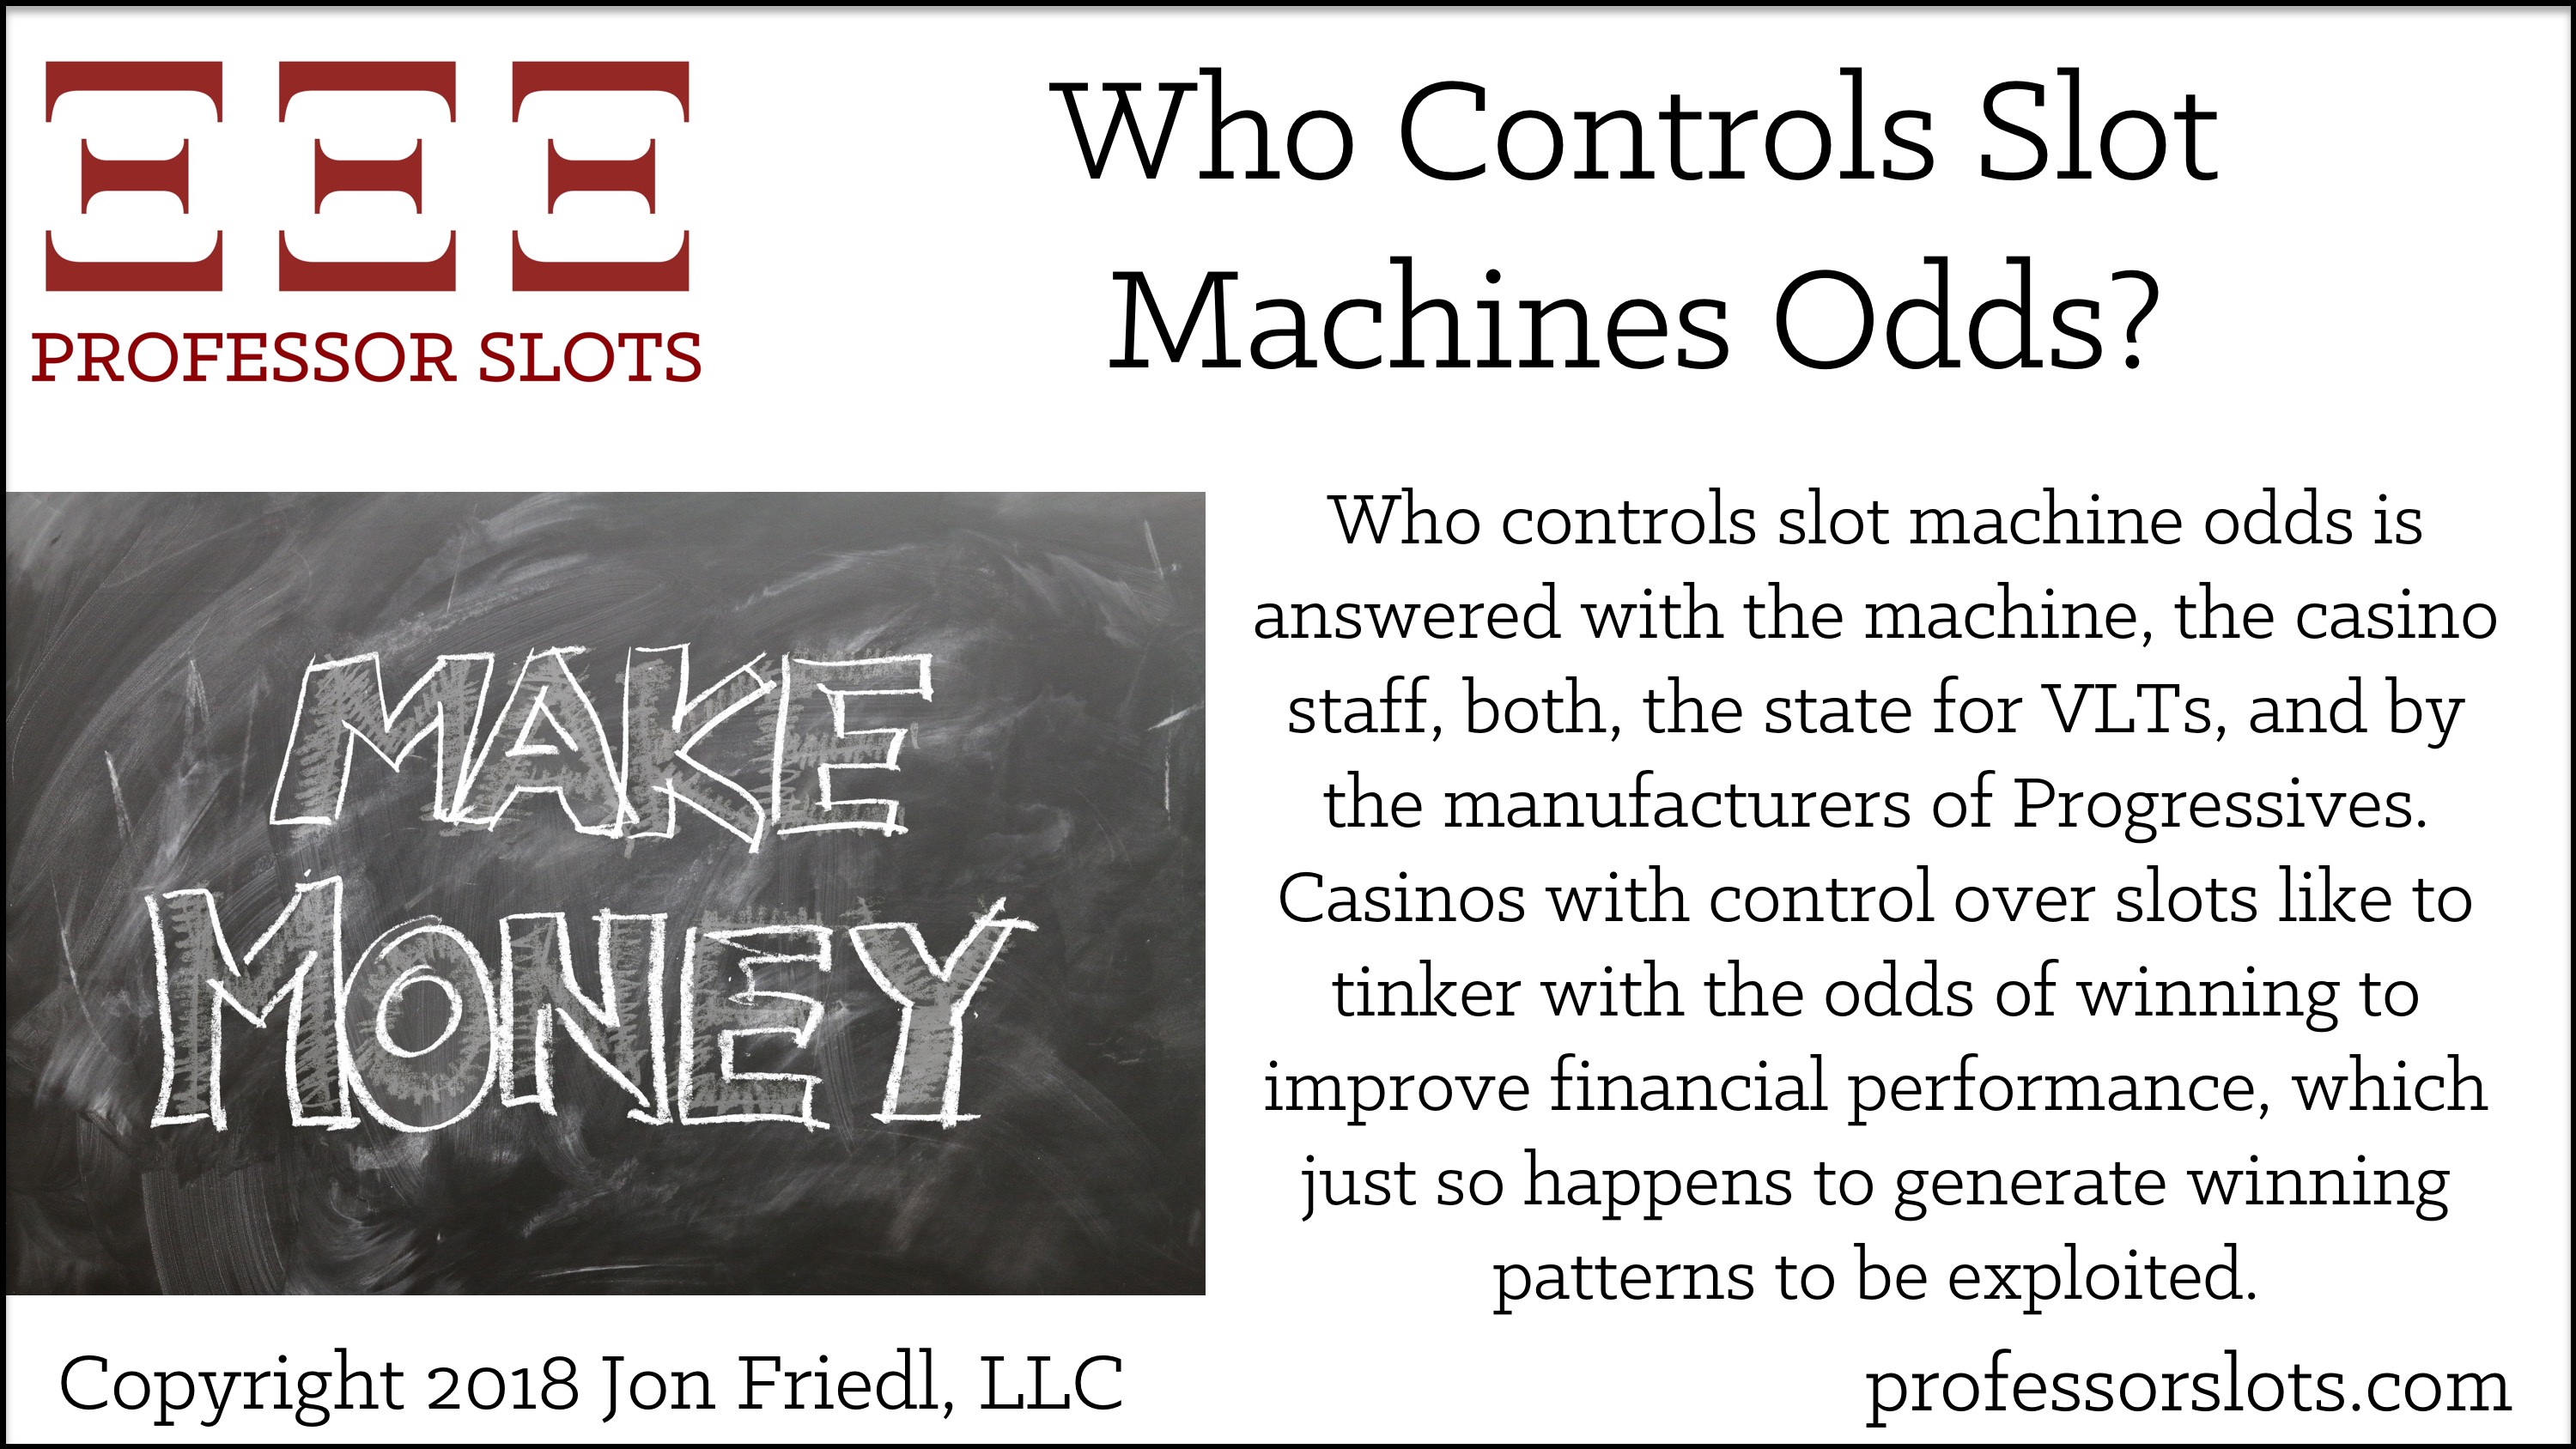 can slot machine odds be controled electronically